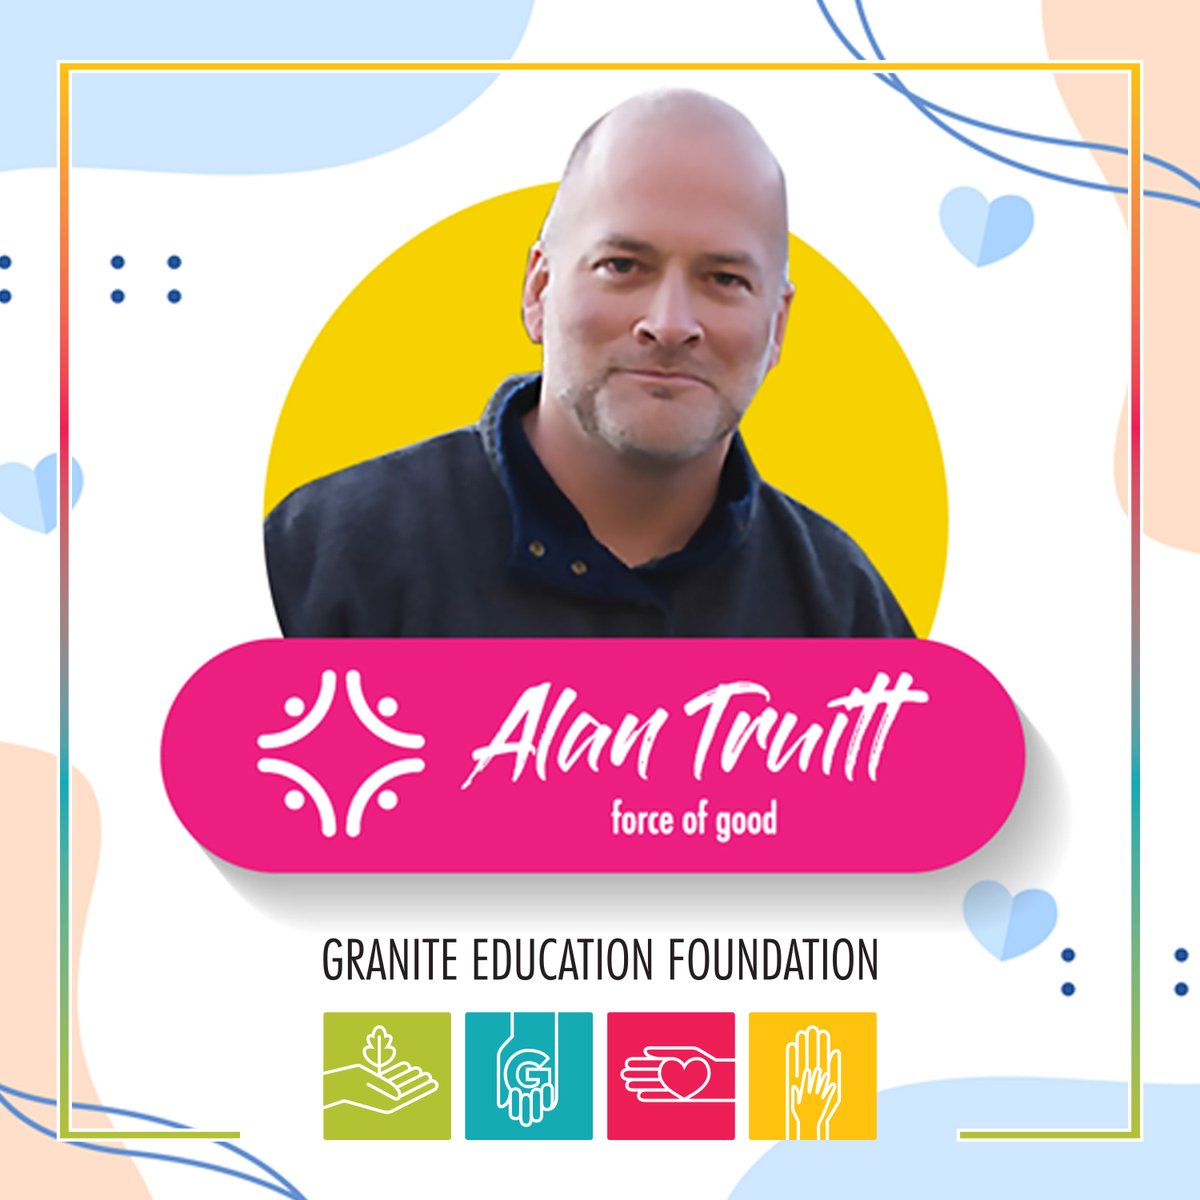 Granite Education Foundation is proud and grateful to partner with the Alan Truitt Force of Good. In fact, this week, they will match every donation up to $20,000! So your gift can do more than ever before! Simply make your donation now at GraniteKids.org.